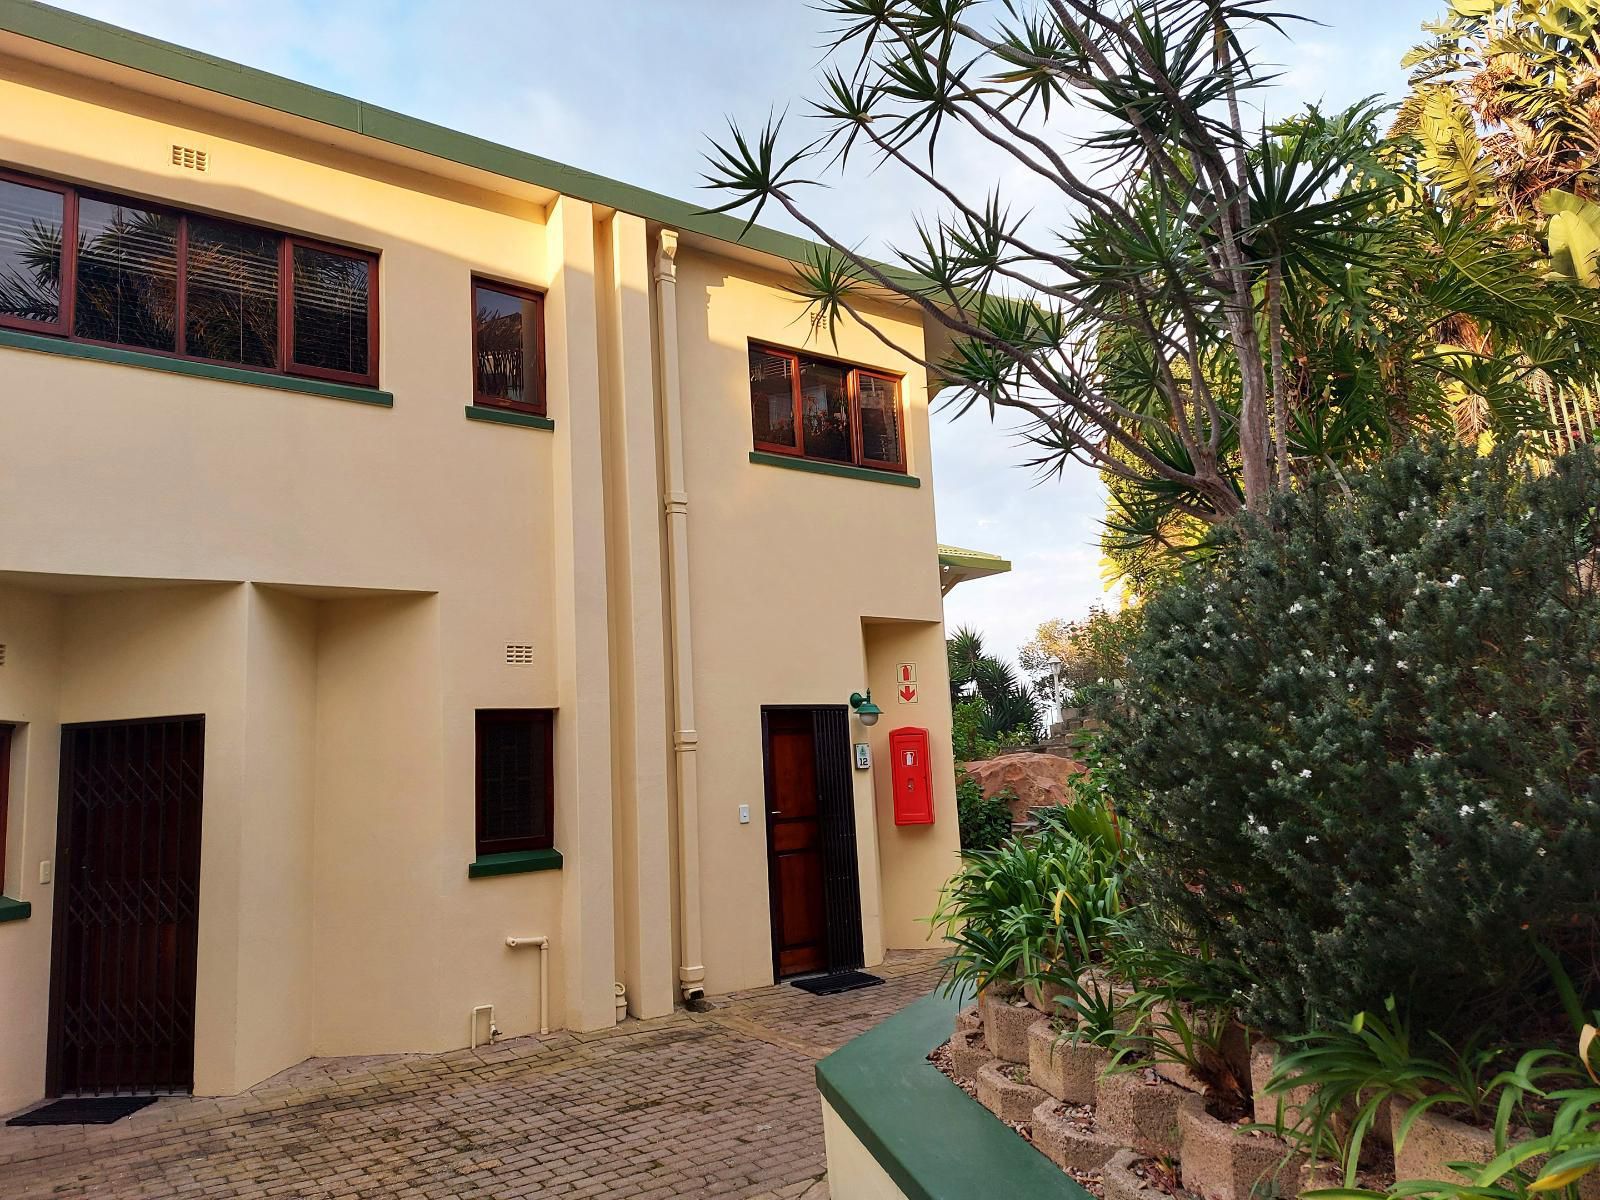 First Group Perna Perna Mossel Bay Linkside Mossel Bay Mossel Bay Western Cape South Africa House, Building, Architecture, Palm Tree, Plant, Nature, Wood